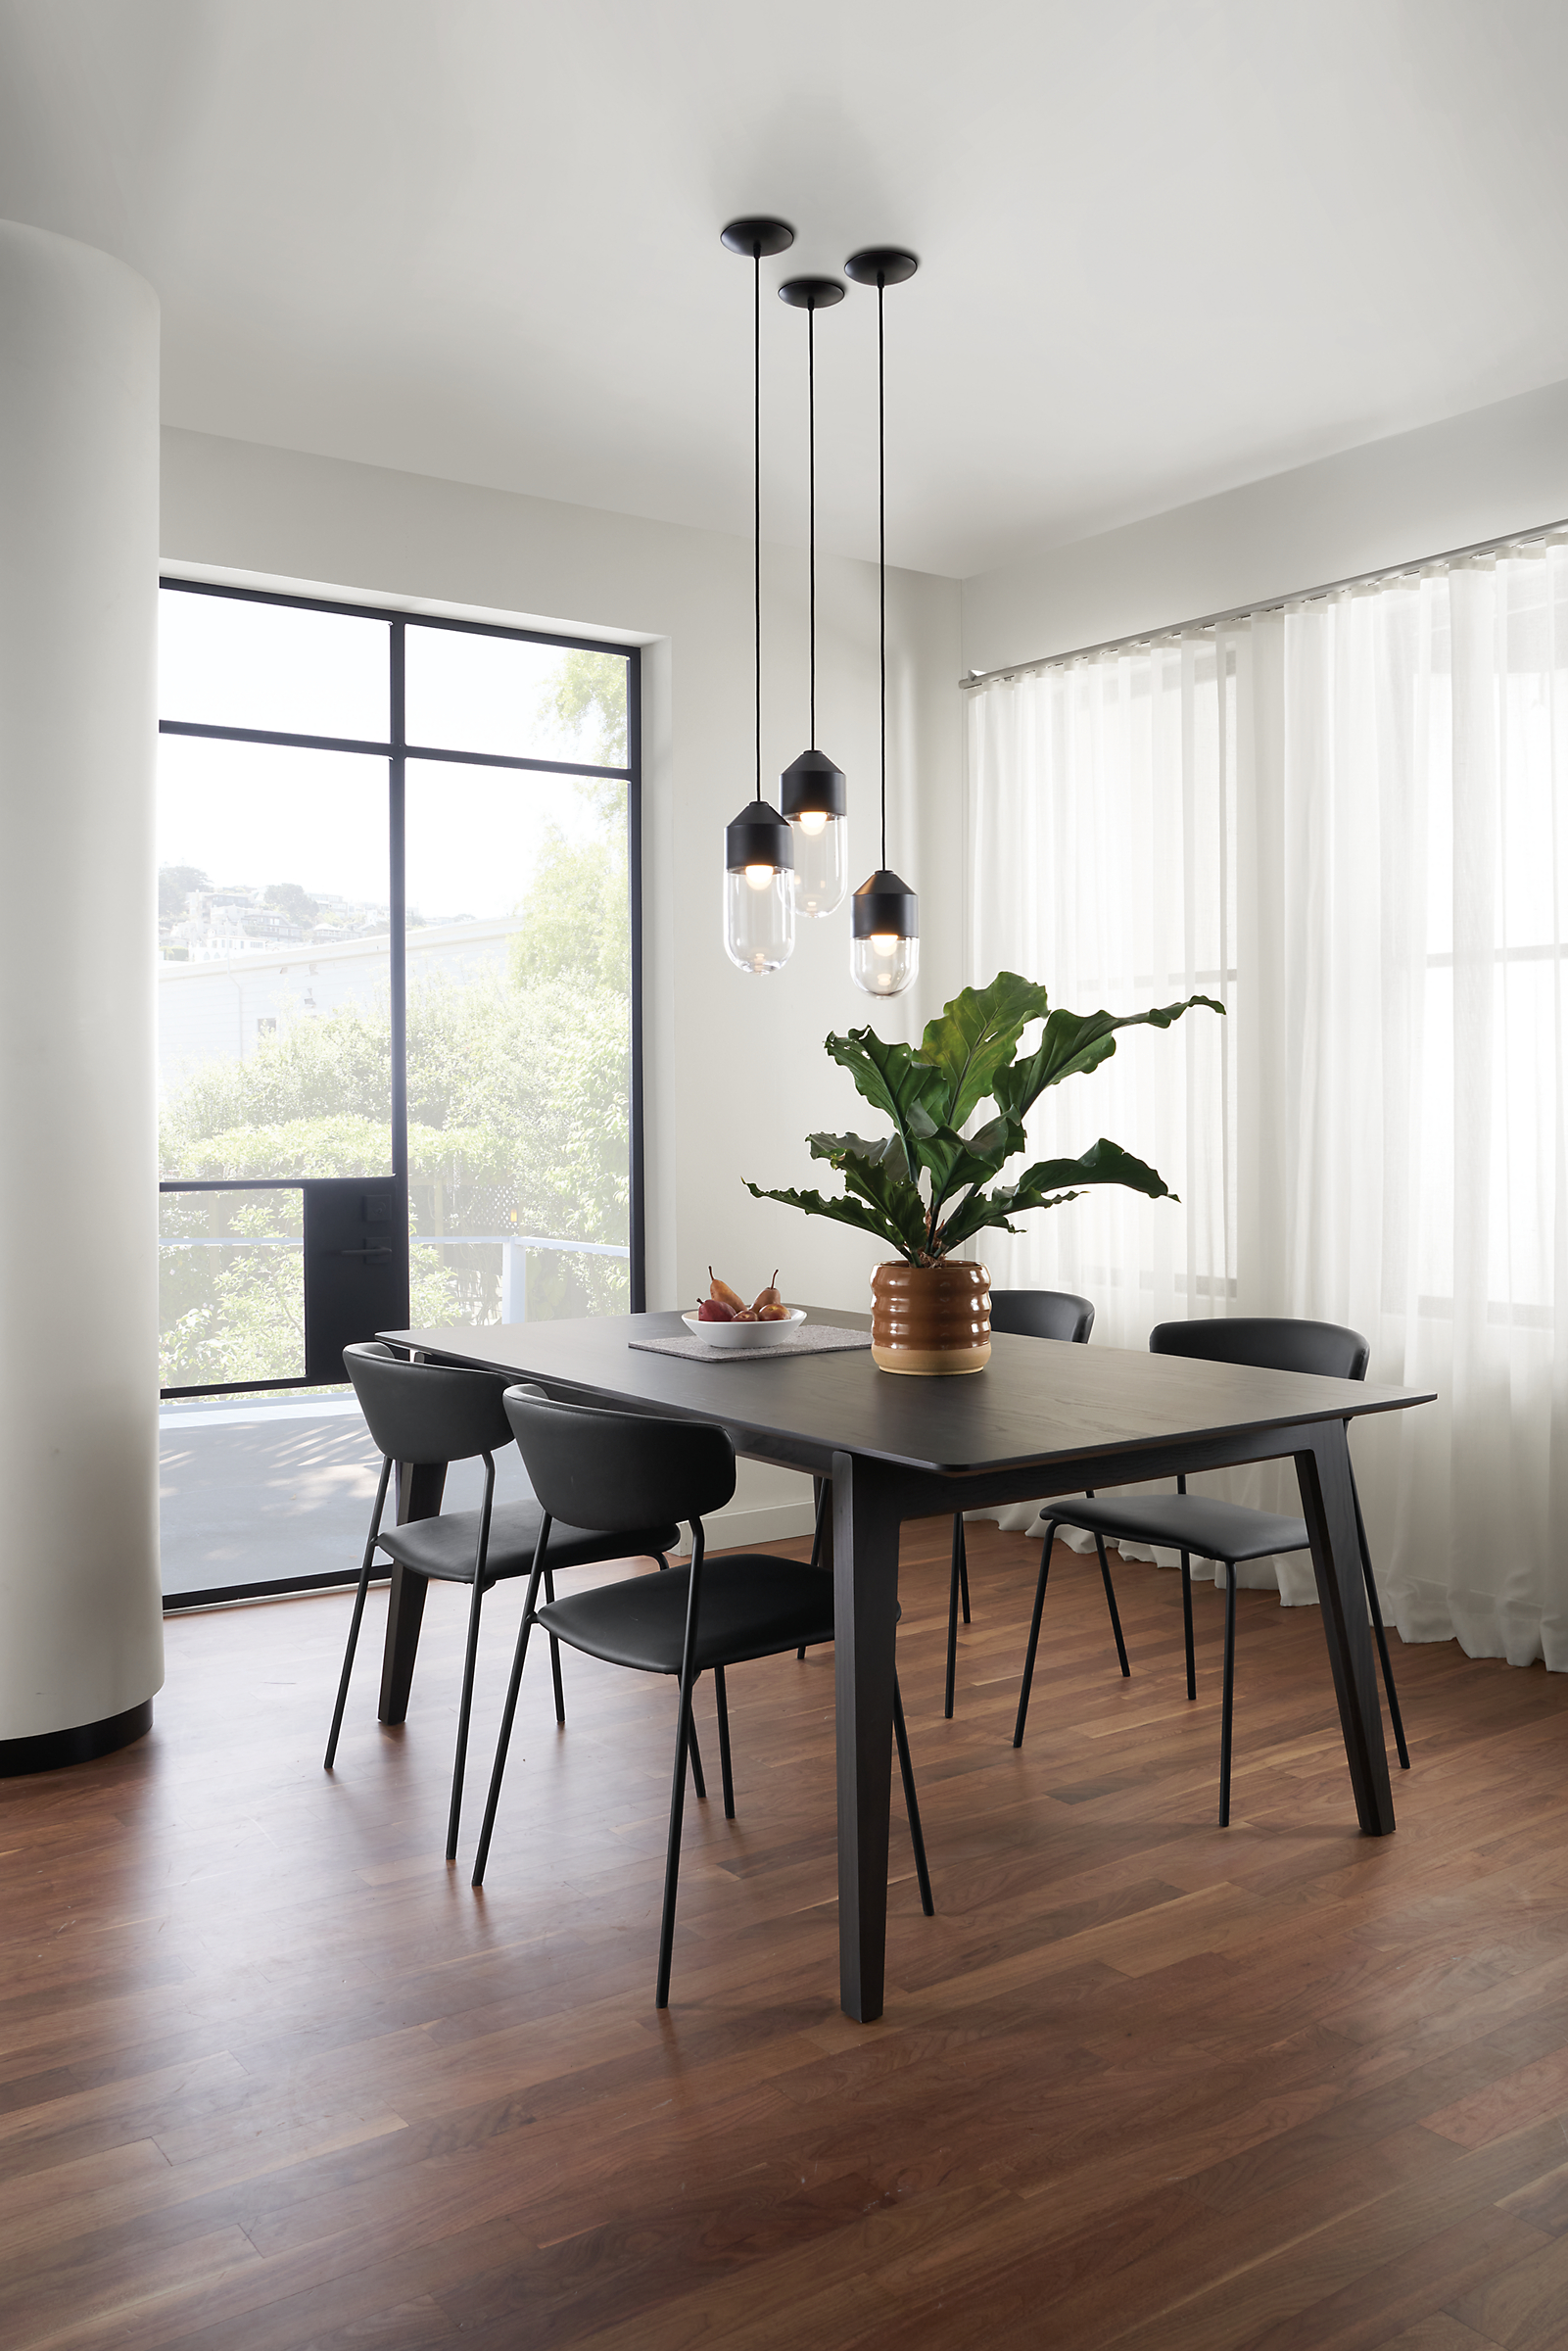 Room setting with an Orlin Dining Table and Wolfgang Chairs with a Ballad pendant grouping.